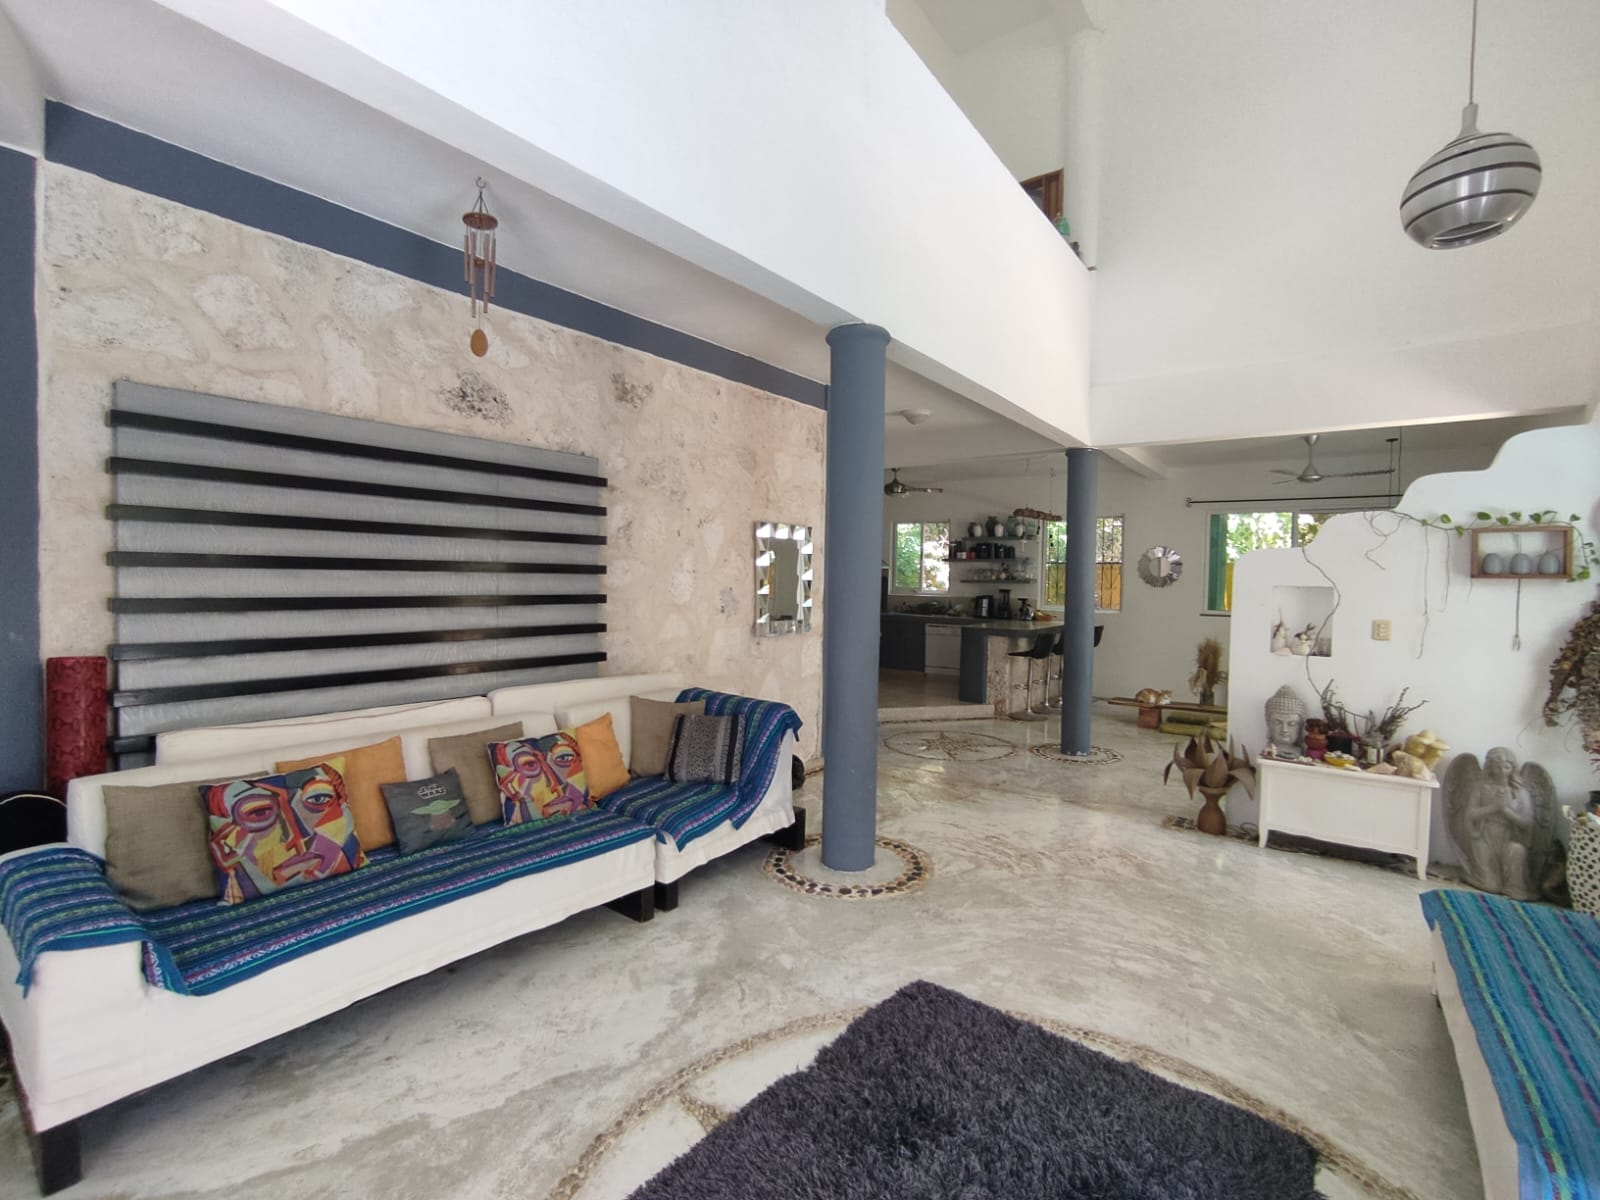 3 bedroom house in Playacar, pool with swimming lane, wading pool, terrace overlooking the pool, for sale, Playa del Carmen.